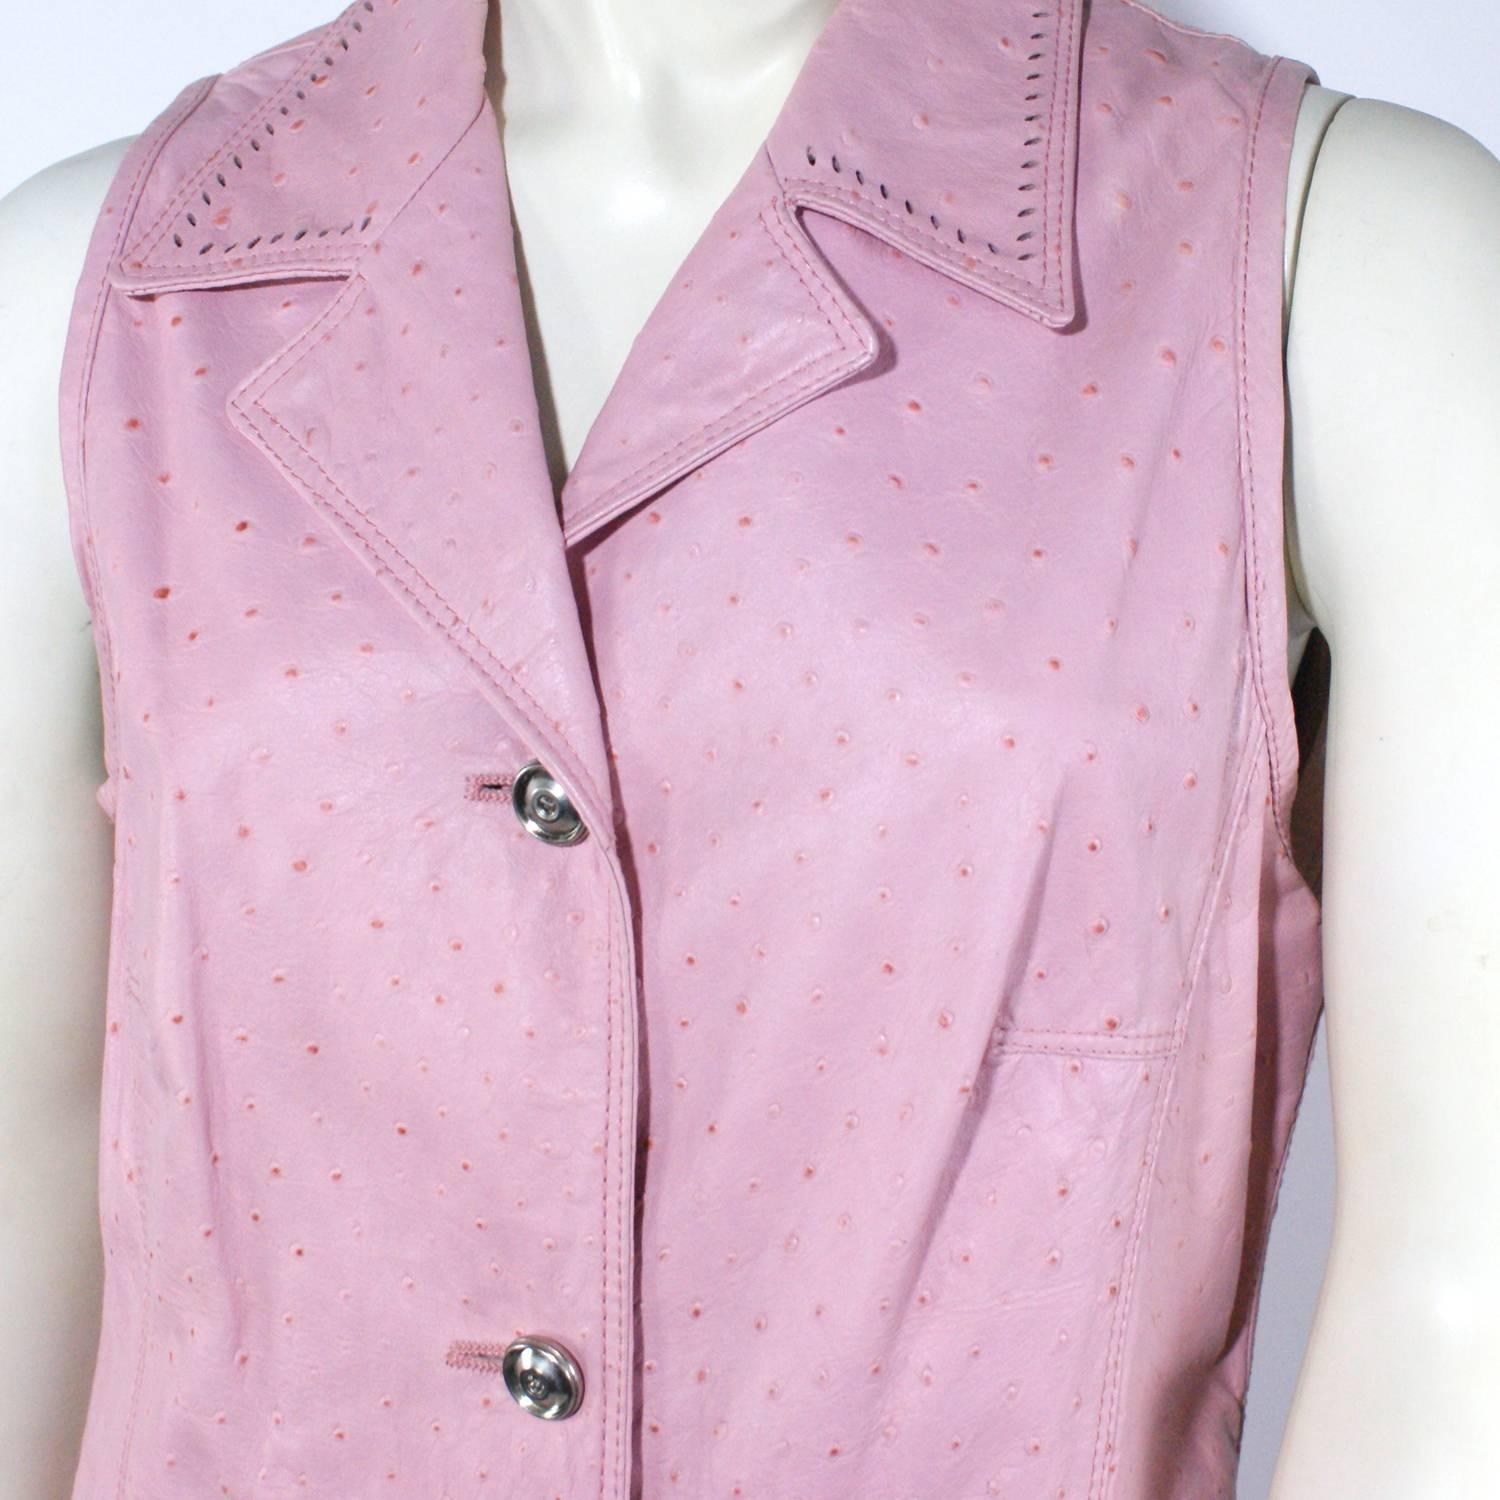 Gianfranco Ferre Pink Ostrich Leather Vest In Excellent Condition For Sale In Narberth, PA